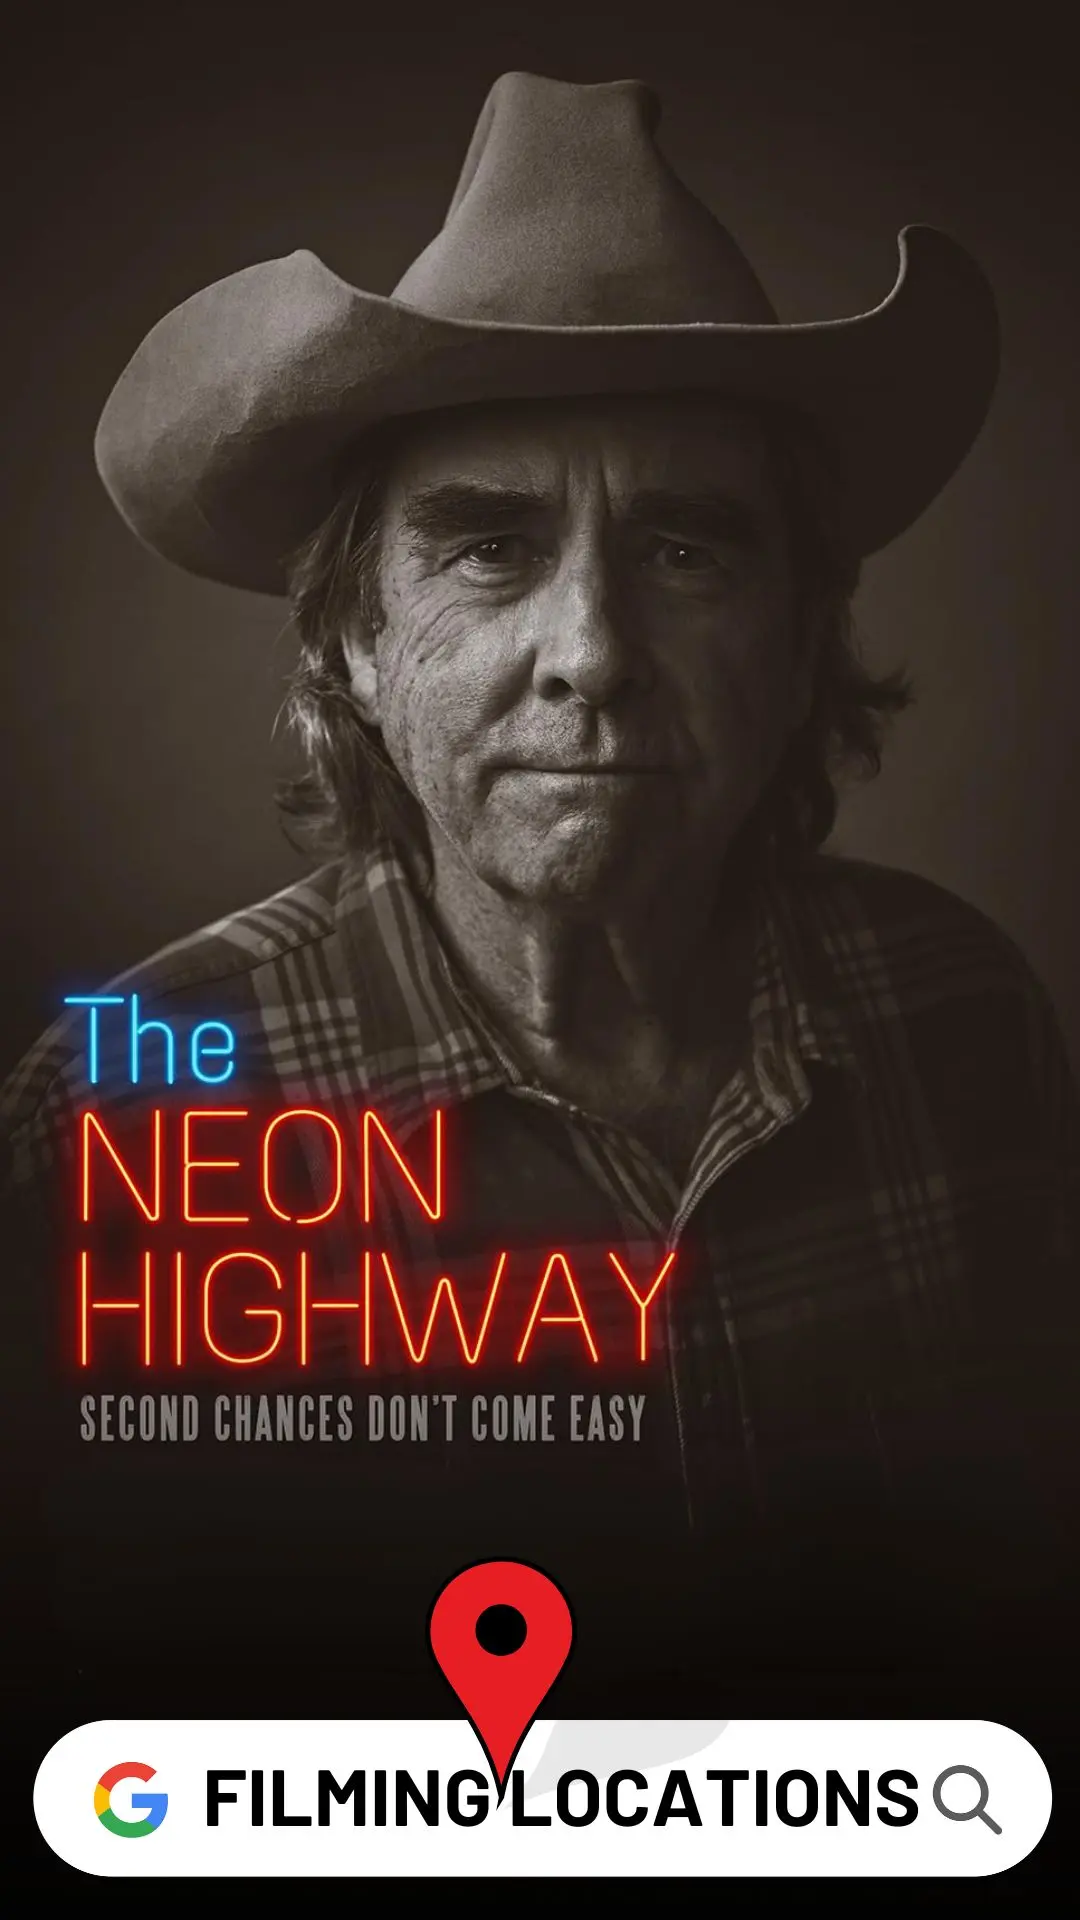 The Neon Highway Filming Locations